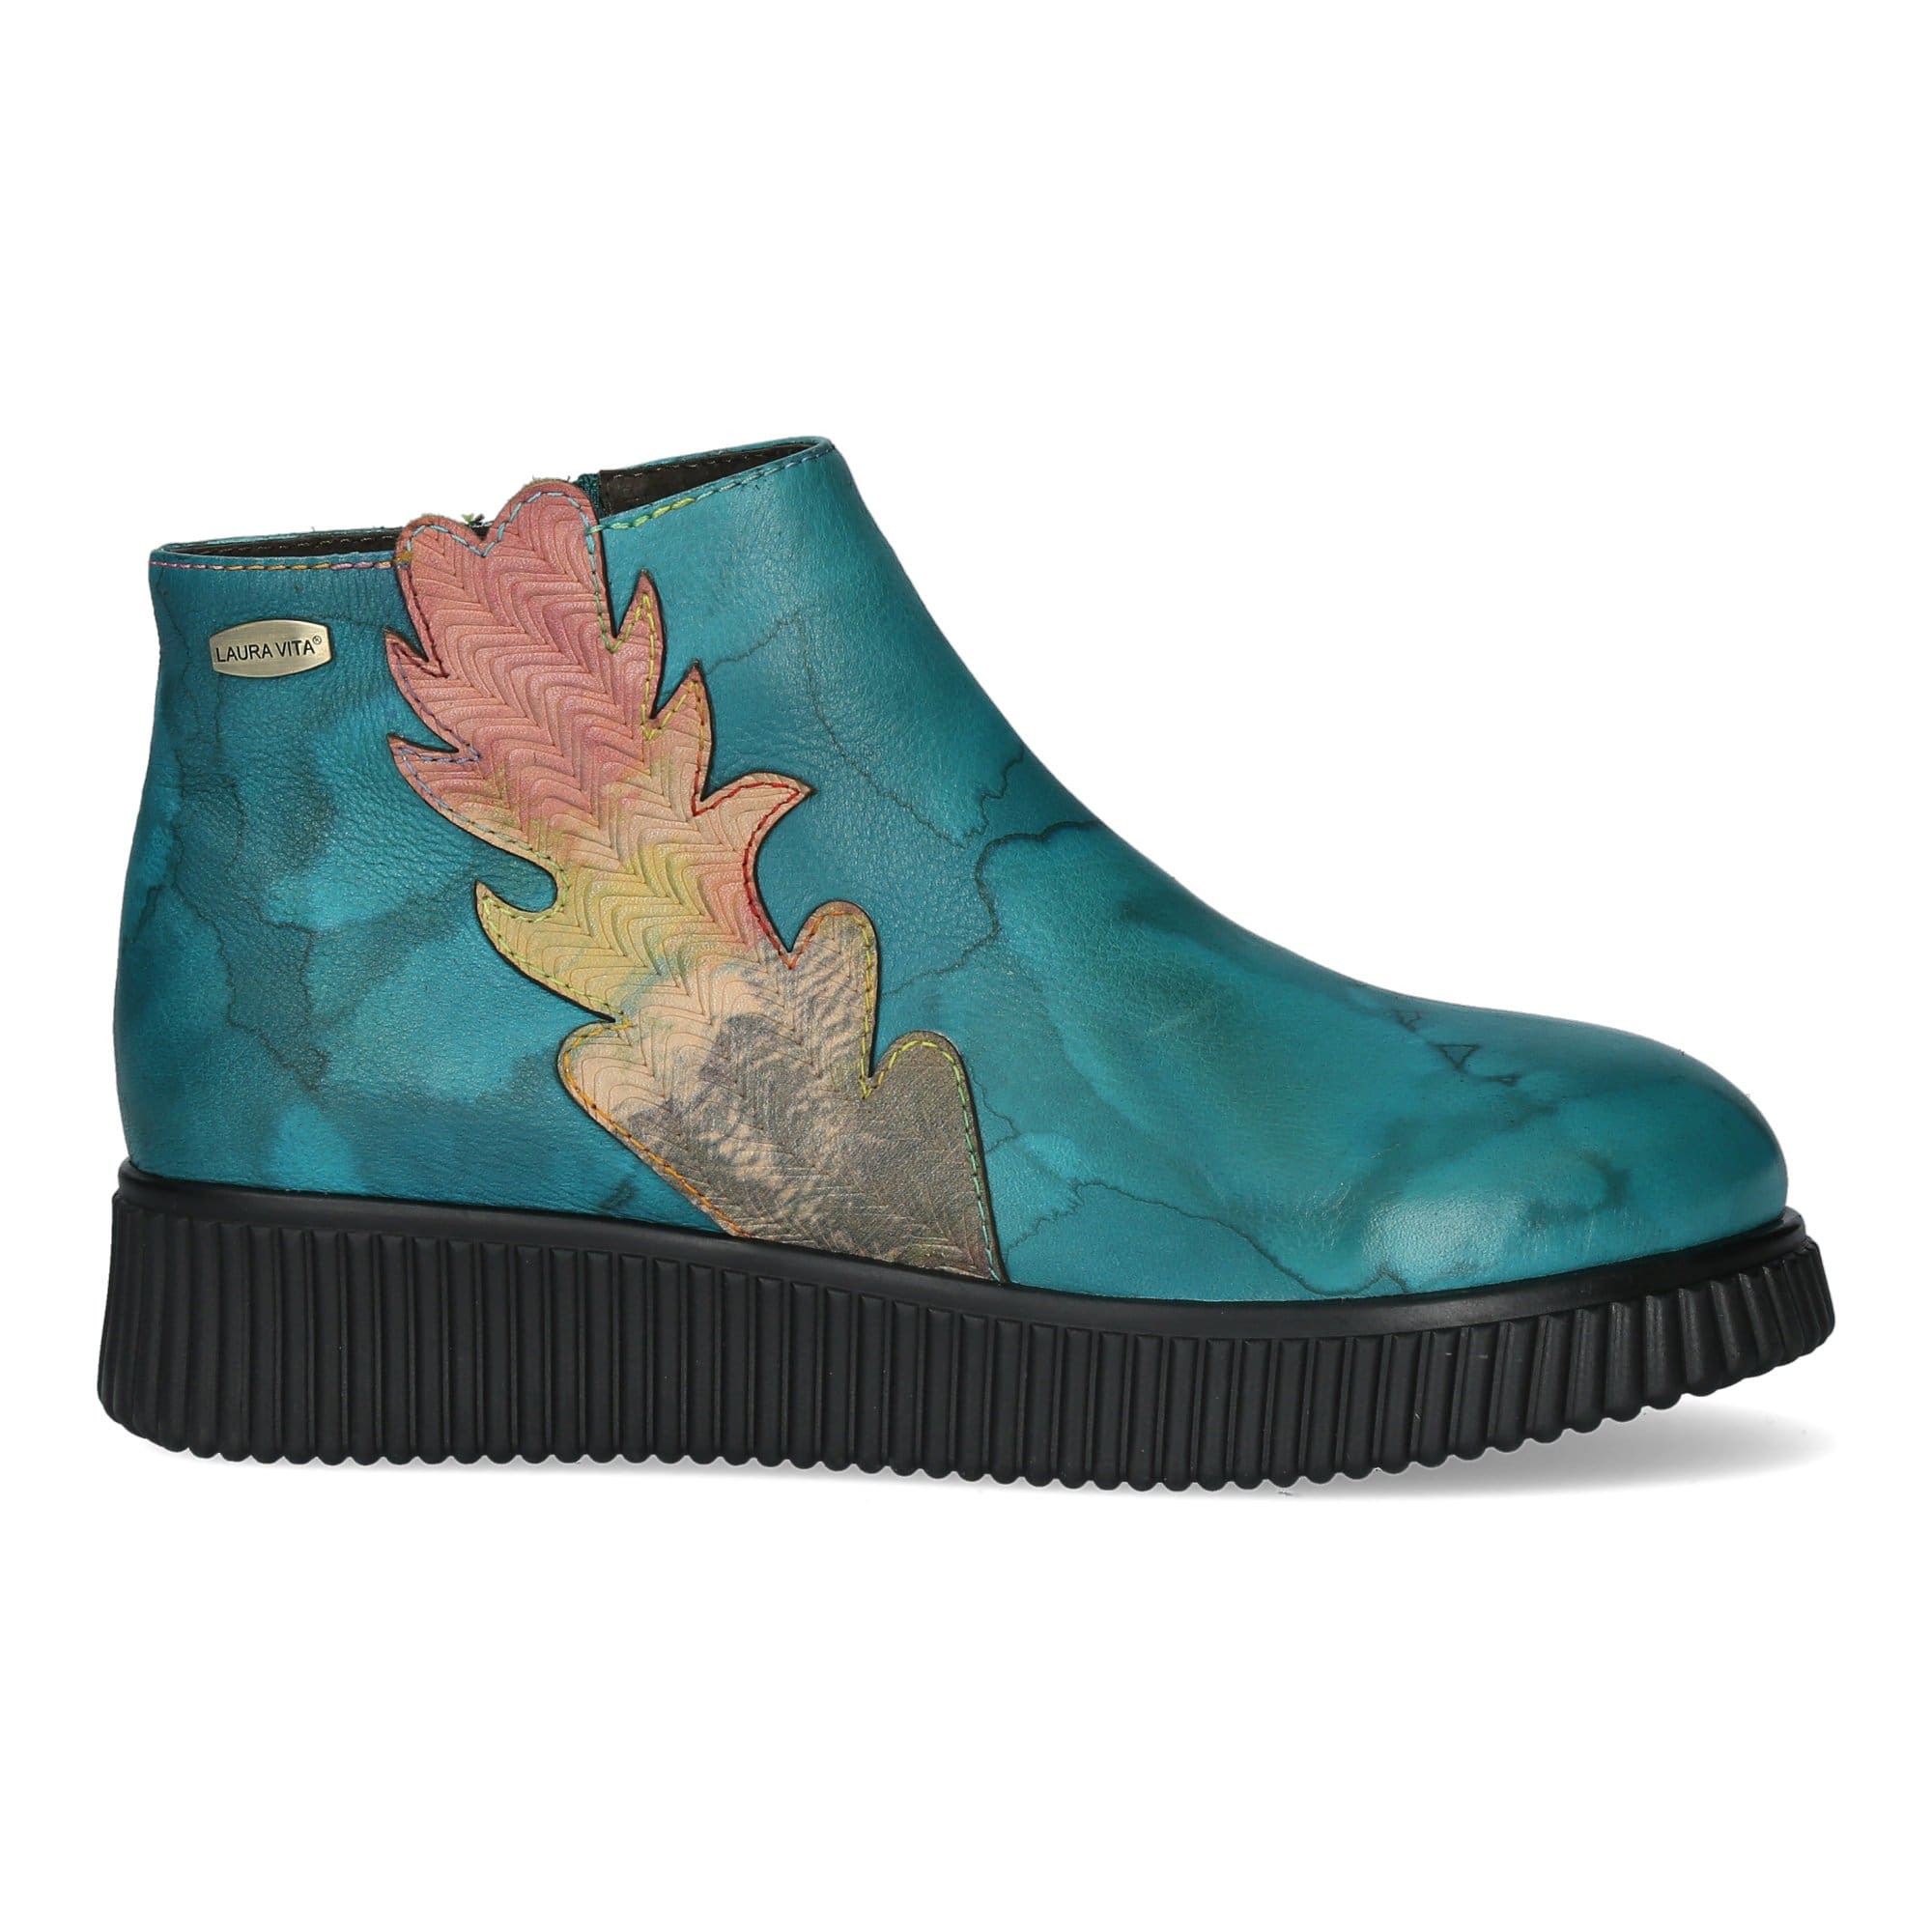 Chaussure IDCAO 25 - 35 / Turquoise - Boots